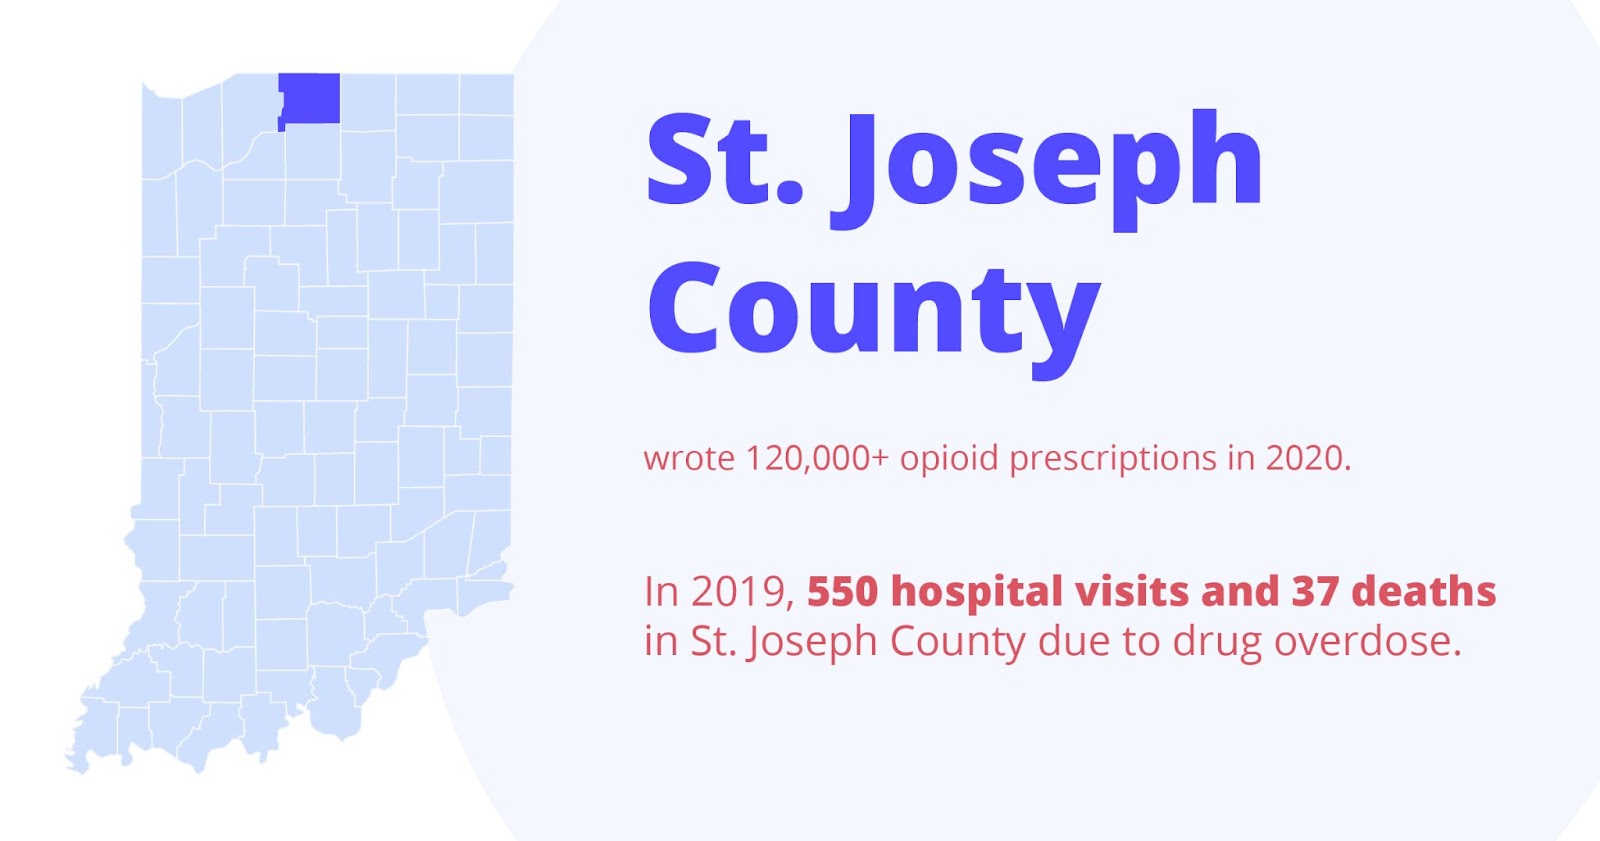 St. Joseph county wrote 120,000+ opioid prescriptions in 2020. In 2019, 550 hospital visits and 37 deaths in St. Joseph county due to drug overdose.